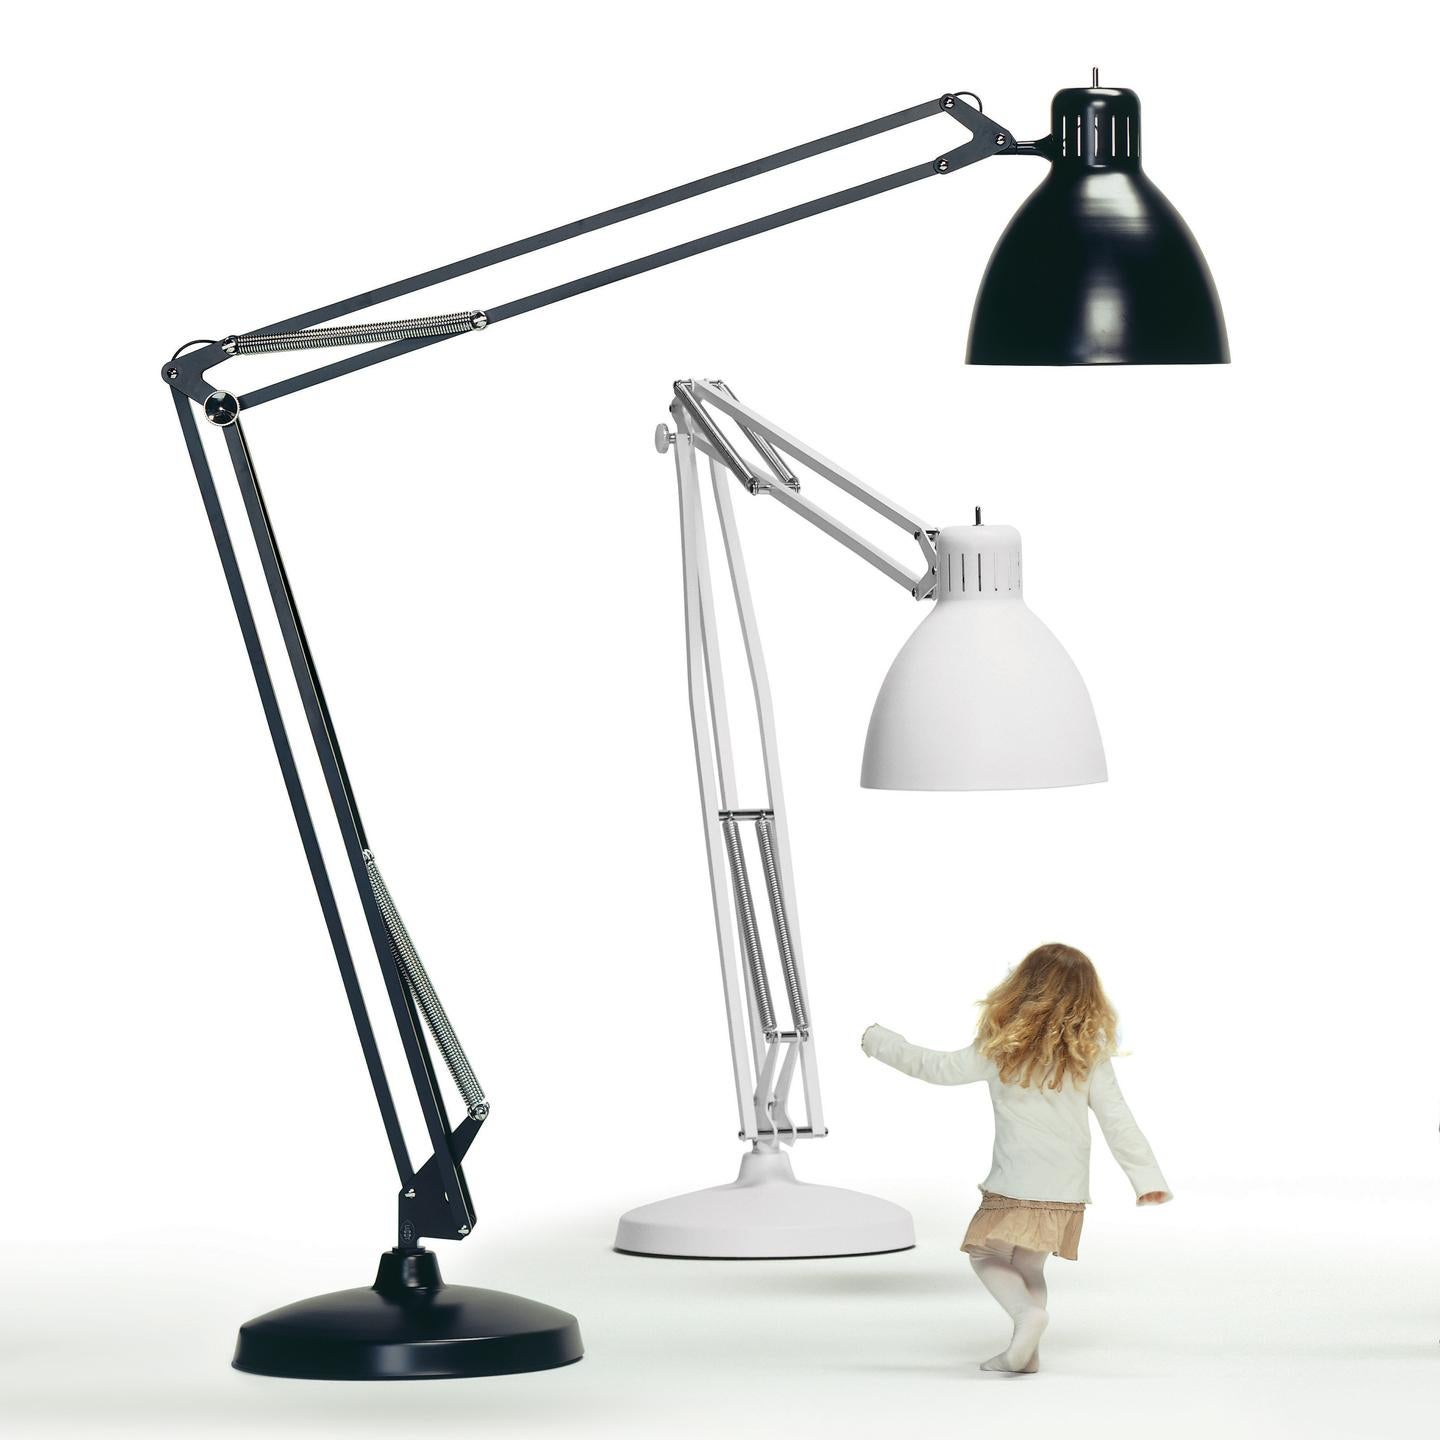 The Great JJ Outdoor Floor Lamp updates the original Jac Jacobsen L-1 architect desk lamp (1937) for contemporary use. The 2009 refresh of this iconic design is a clever play on scale that turns a simple Classic task lamp into a bold statement piece